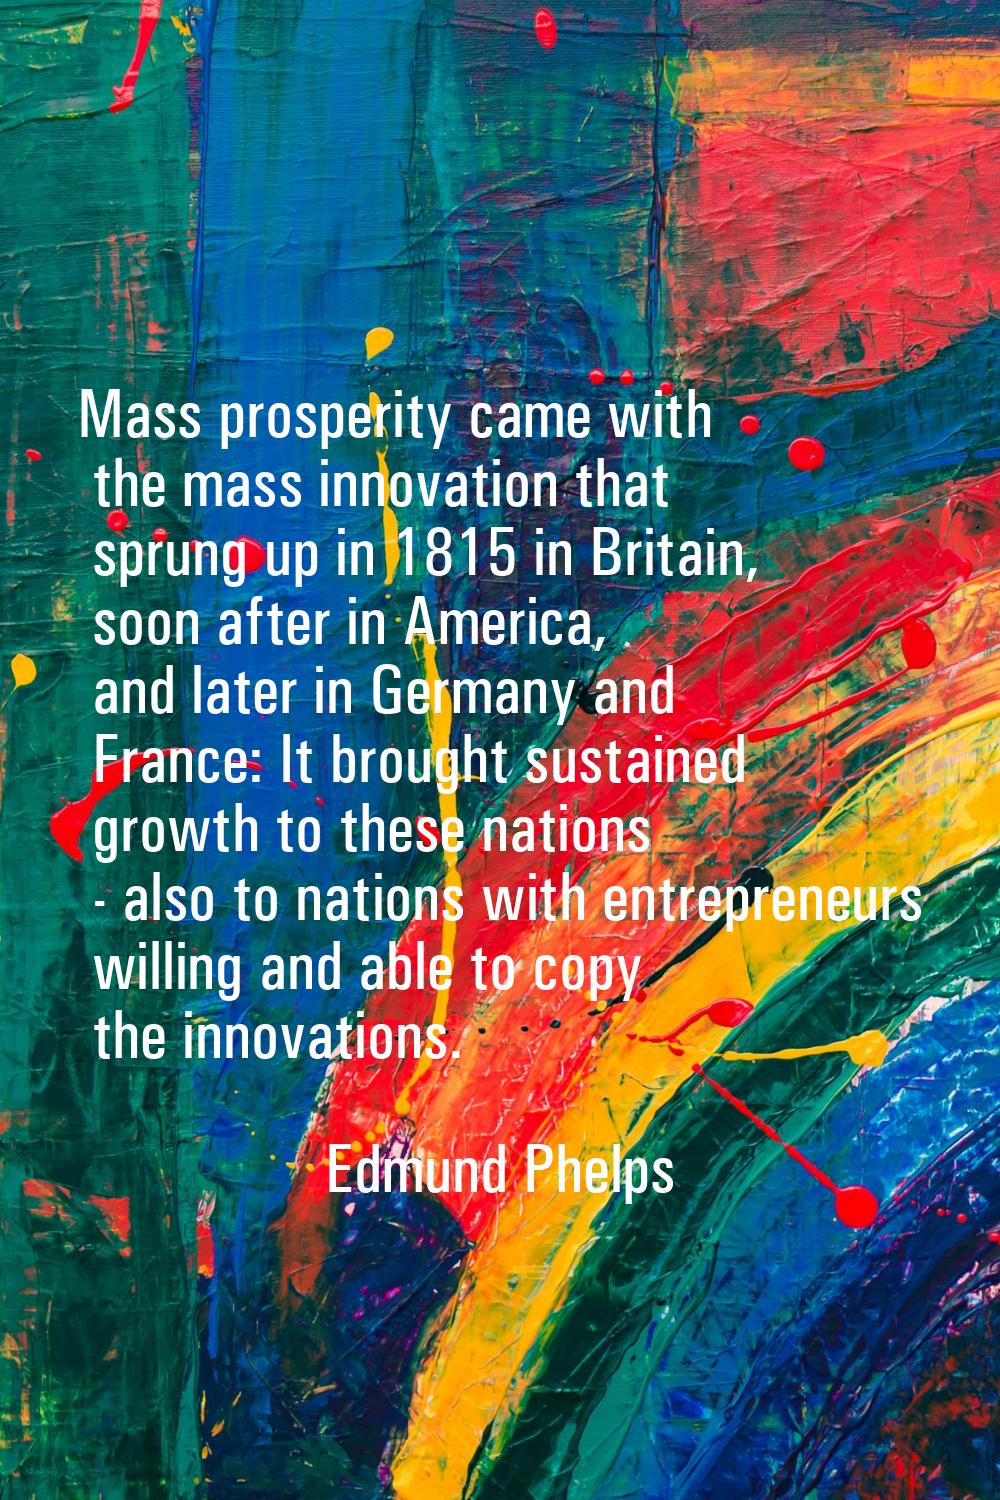 Mass prosperity came with the mass innovation that sprung up in 1815 in Britain, soon after in Amer